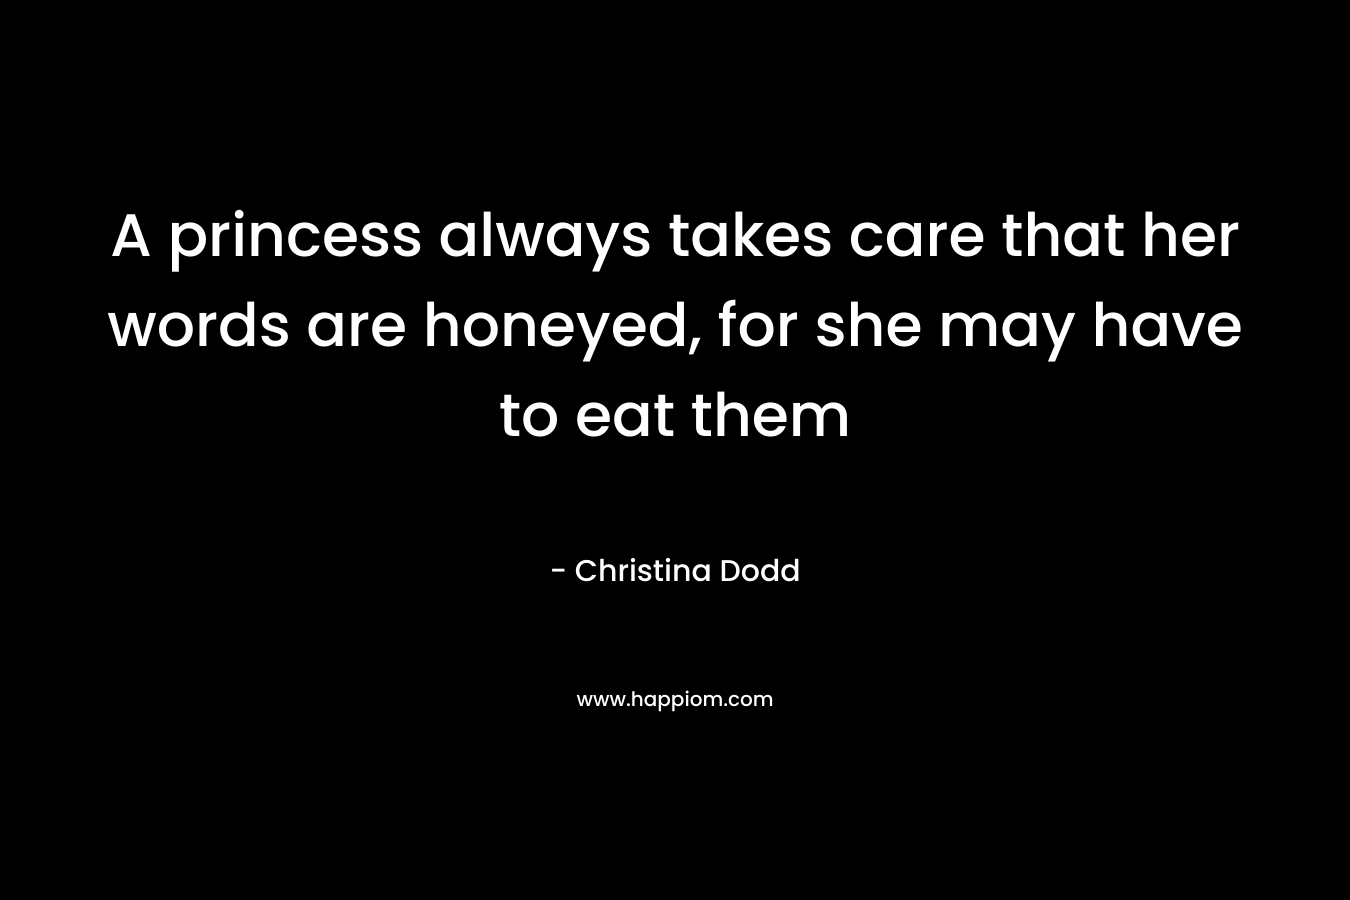 A princess always takes care that her words are honeyed, for she may have to eat them